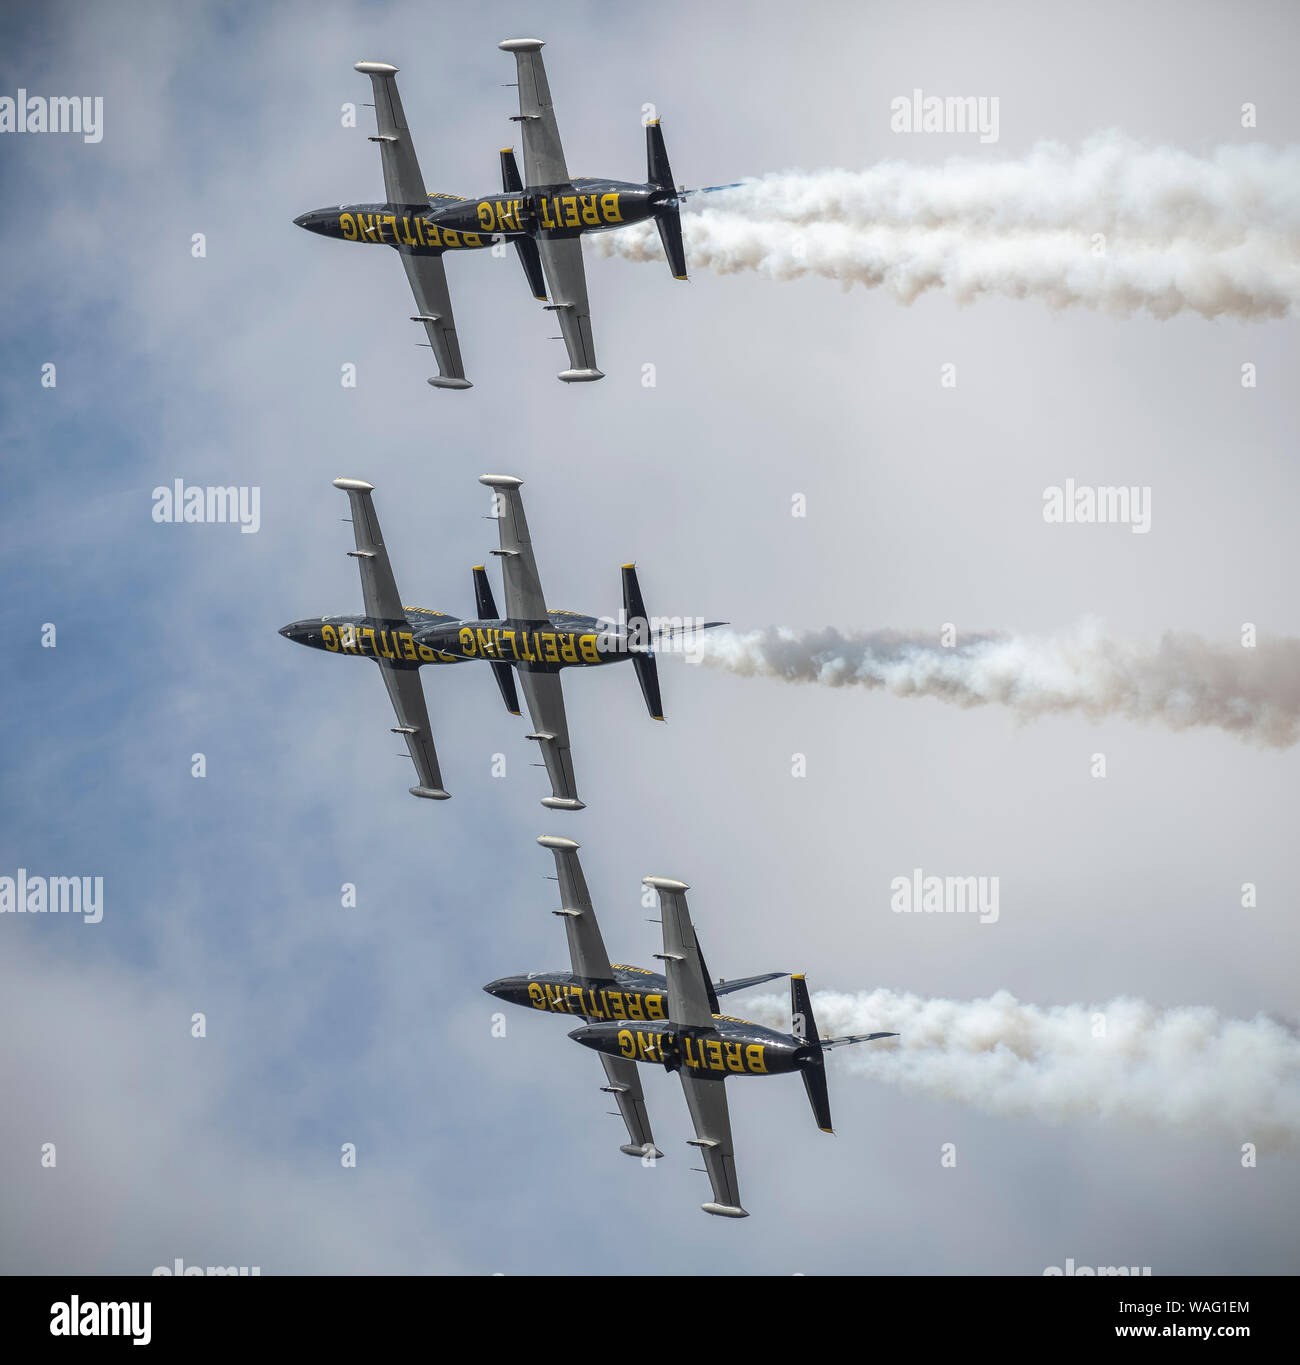 Six L-39 Albatros jet planes forming part of the Breitling Jet Aerobatic Team in the sky with white smoke trails Stock Photo